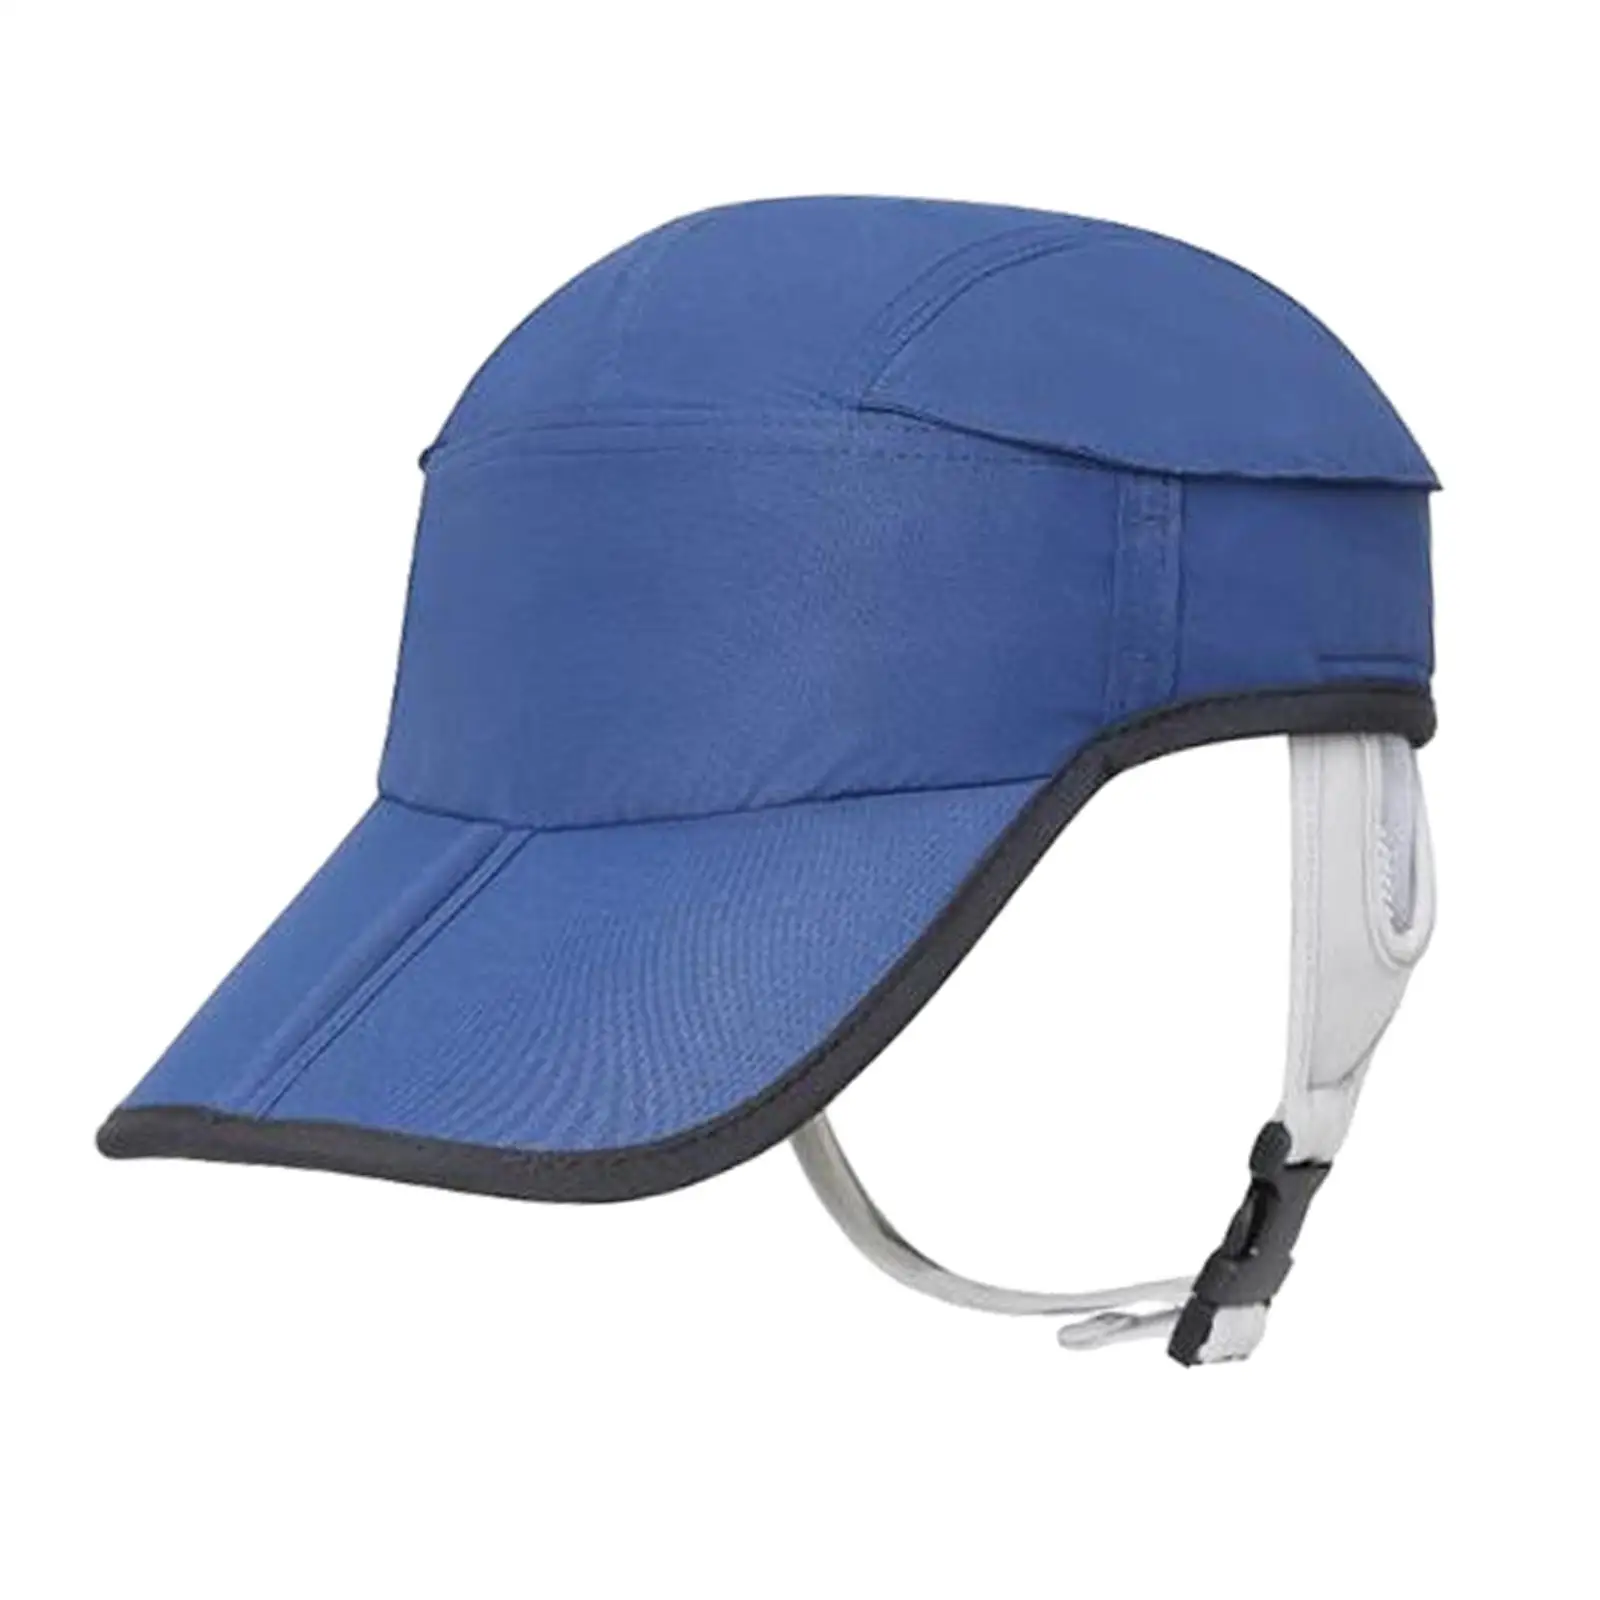 Baseball Cap for Men Comfortable to Wear Fisherman Hat Surfing Hat Sun Visor Hat for Golf Outdoor Sports Fishing Beach Camping